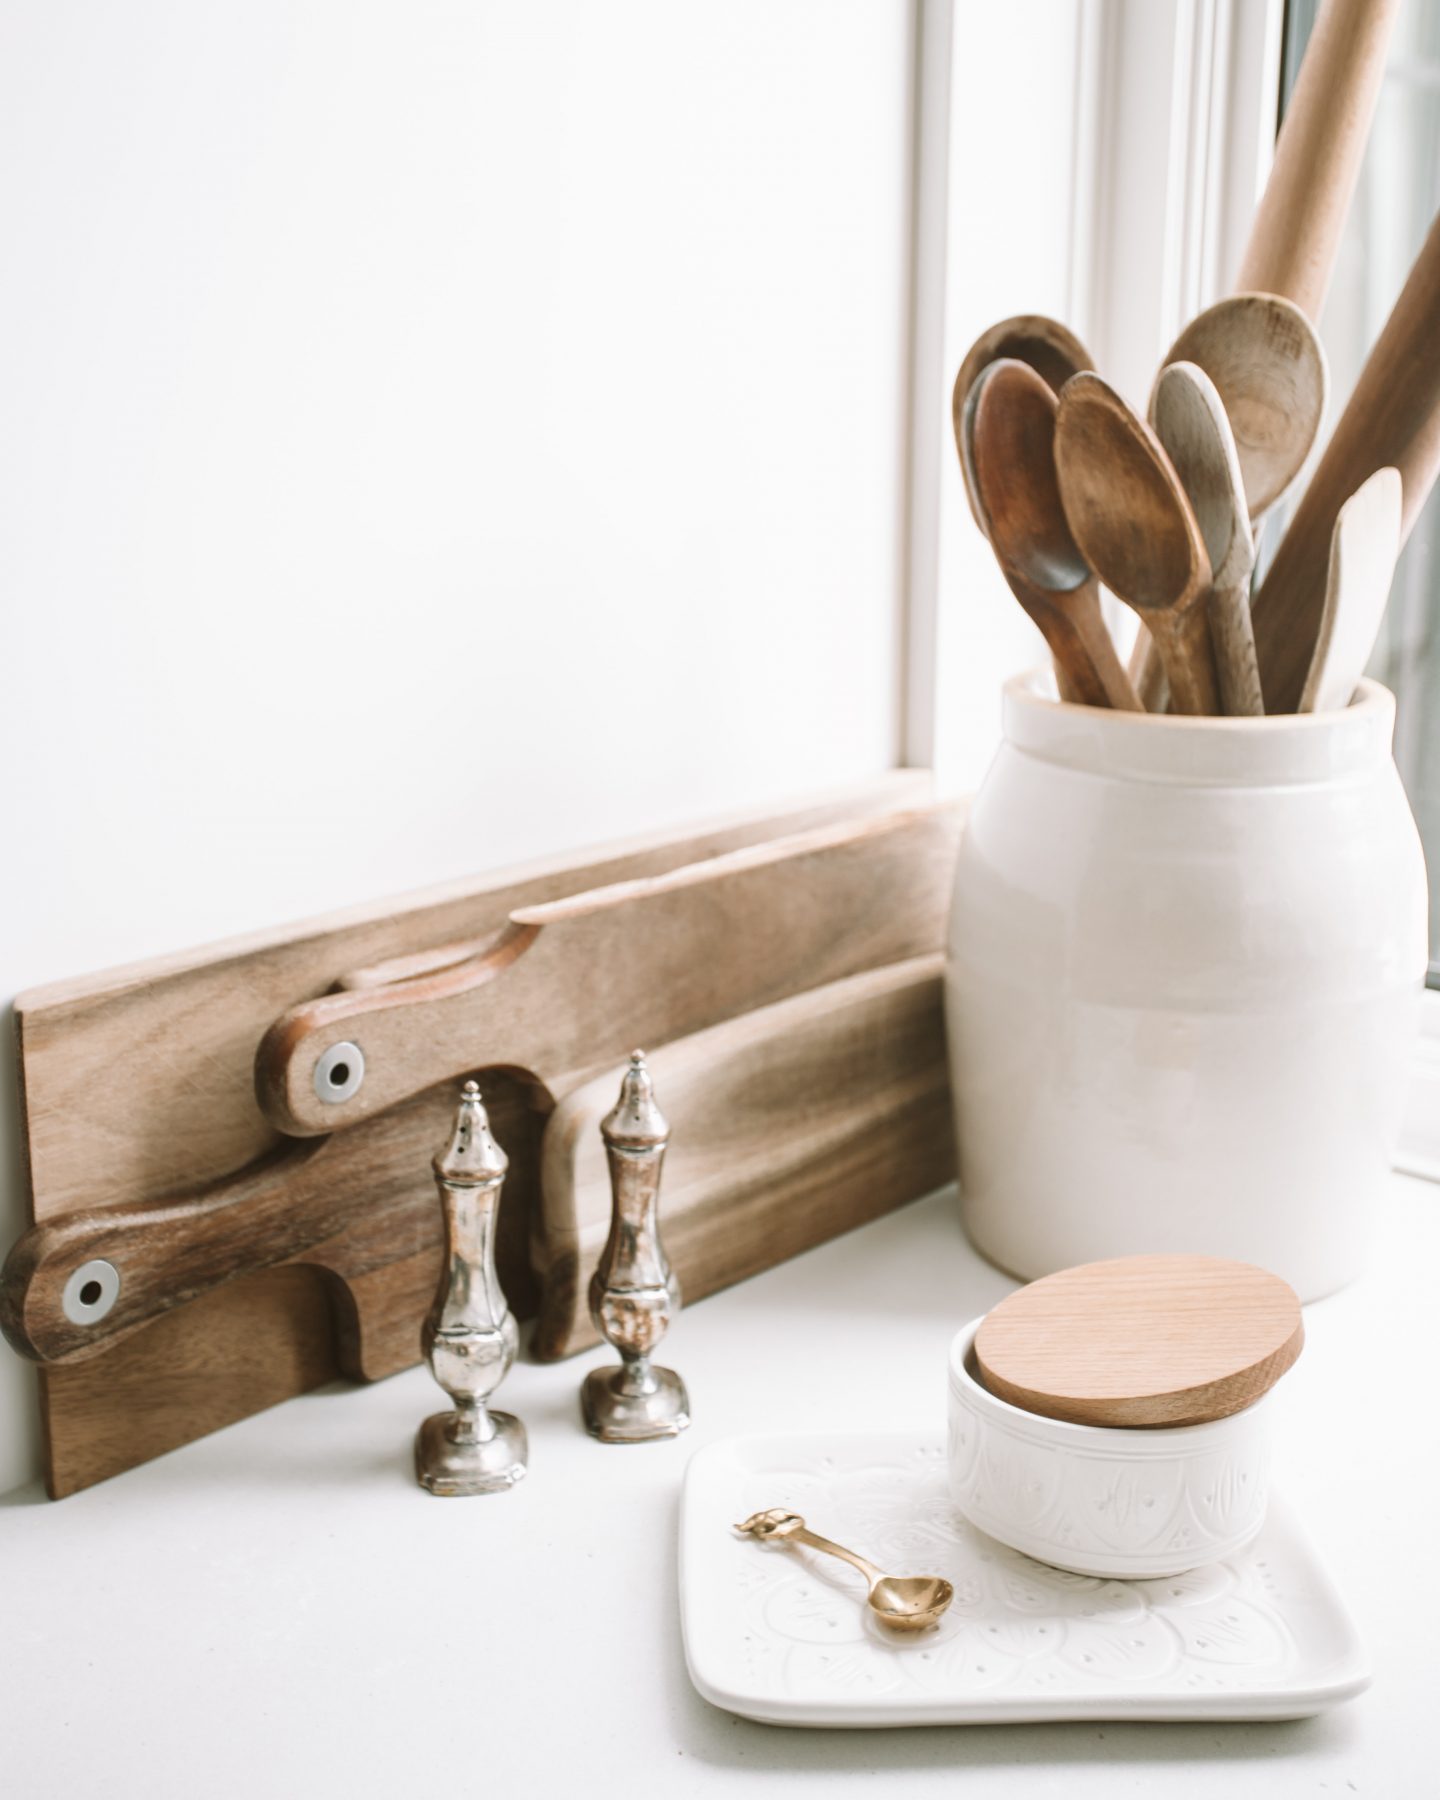 Kitchen counter with crock and wooden spoons. Silver salt and pepper shakers. Cutting boards leaning against the wall.